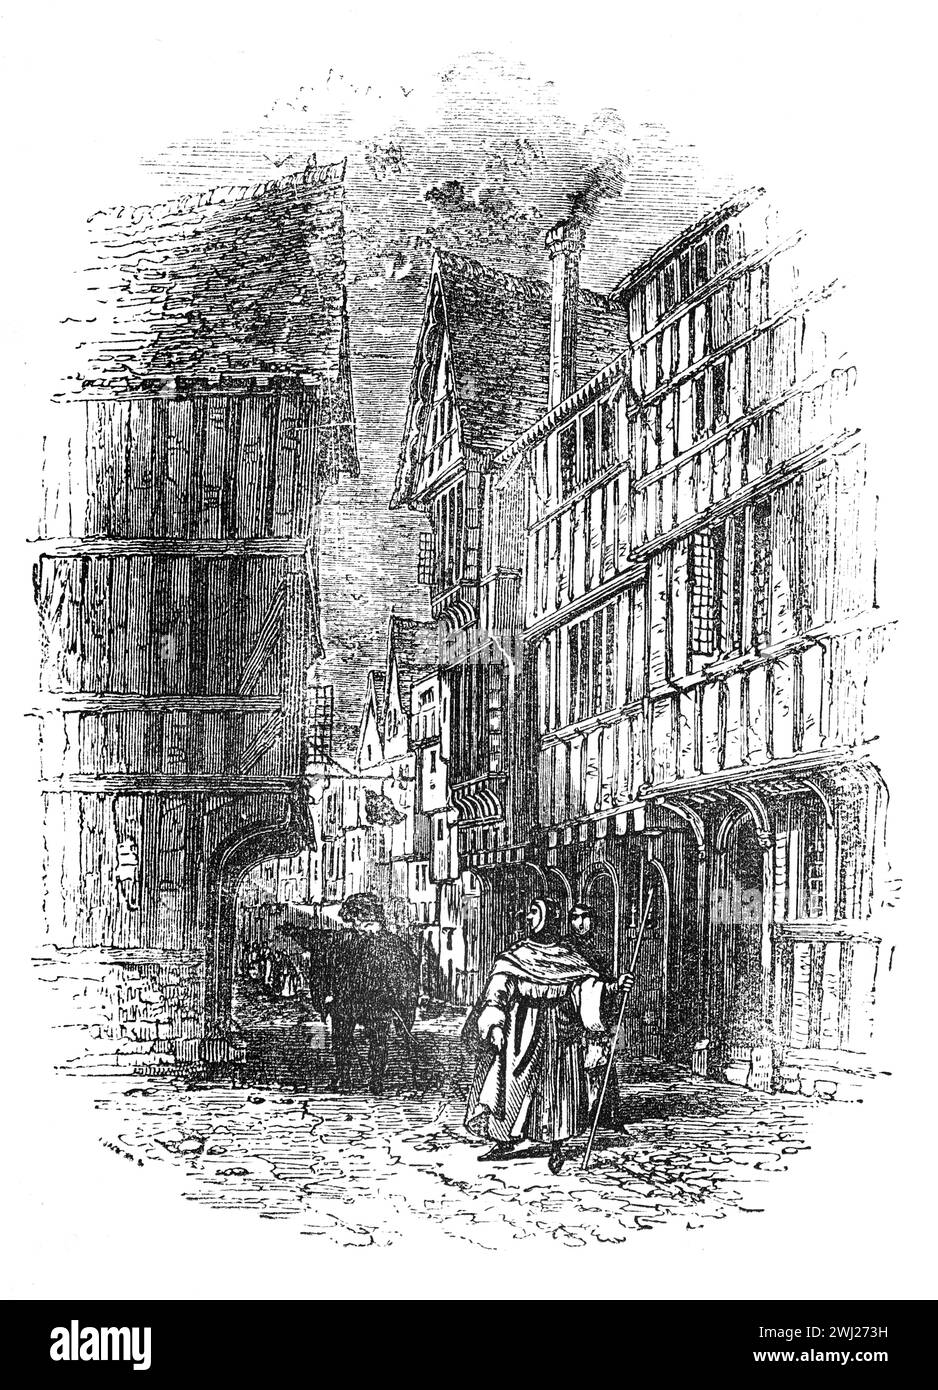 A street in London in the 16th or 17th century. Black and White Illustration from the 'Old England' published by James Sangster in 1860. Stock Photo